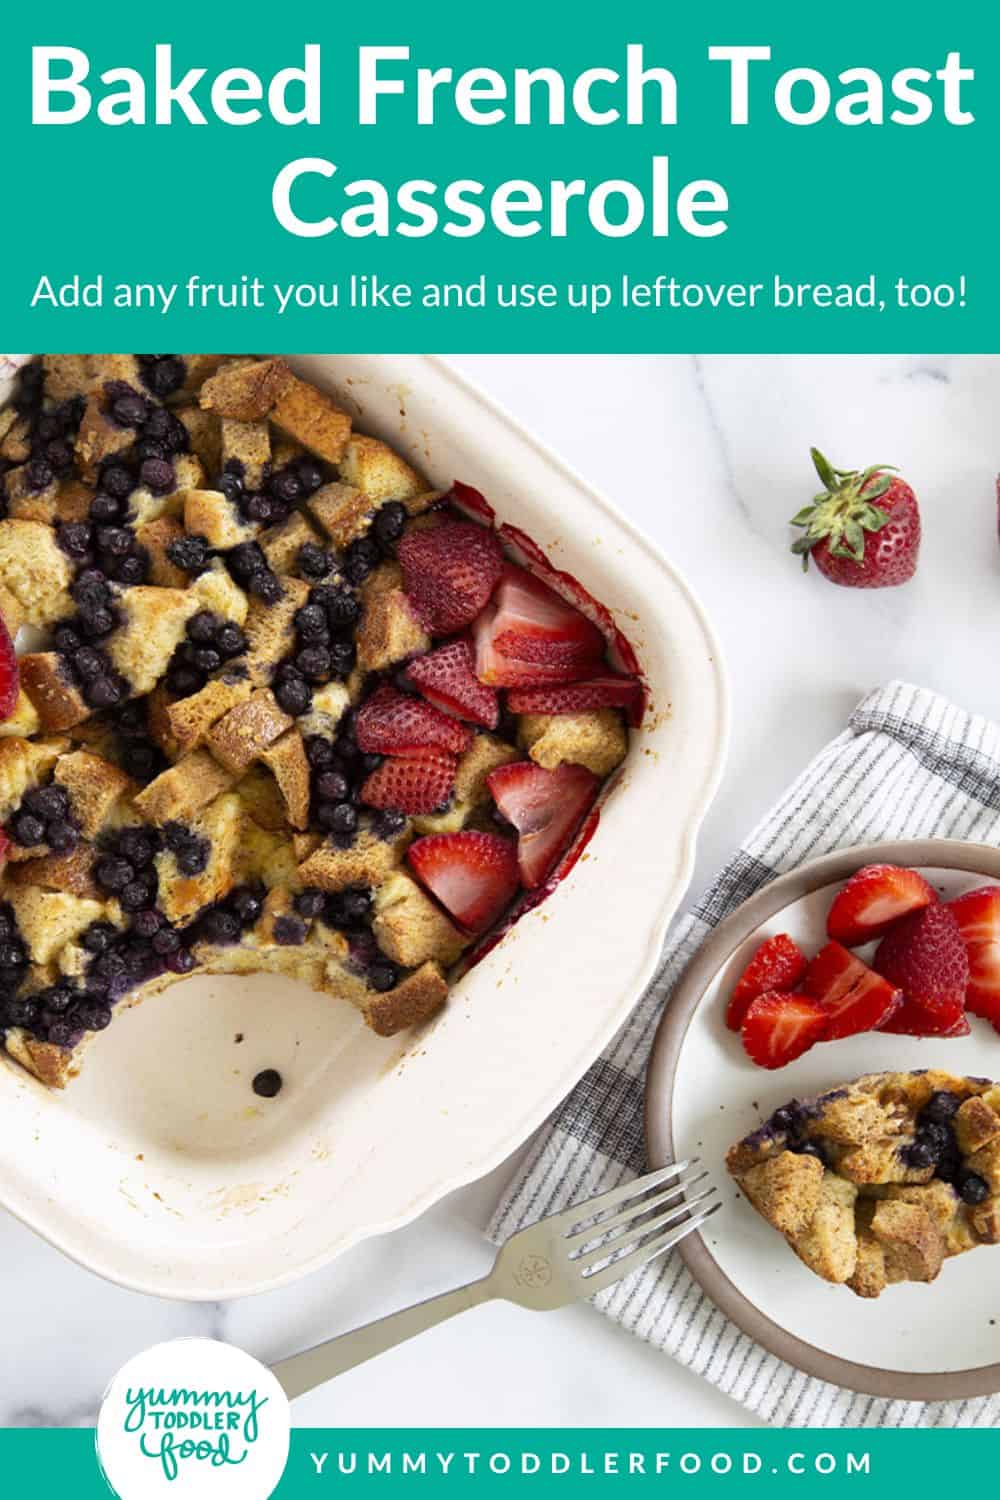 baked french toast casserole recipe on countertop with berries.